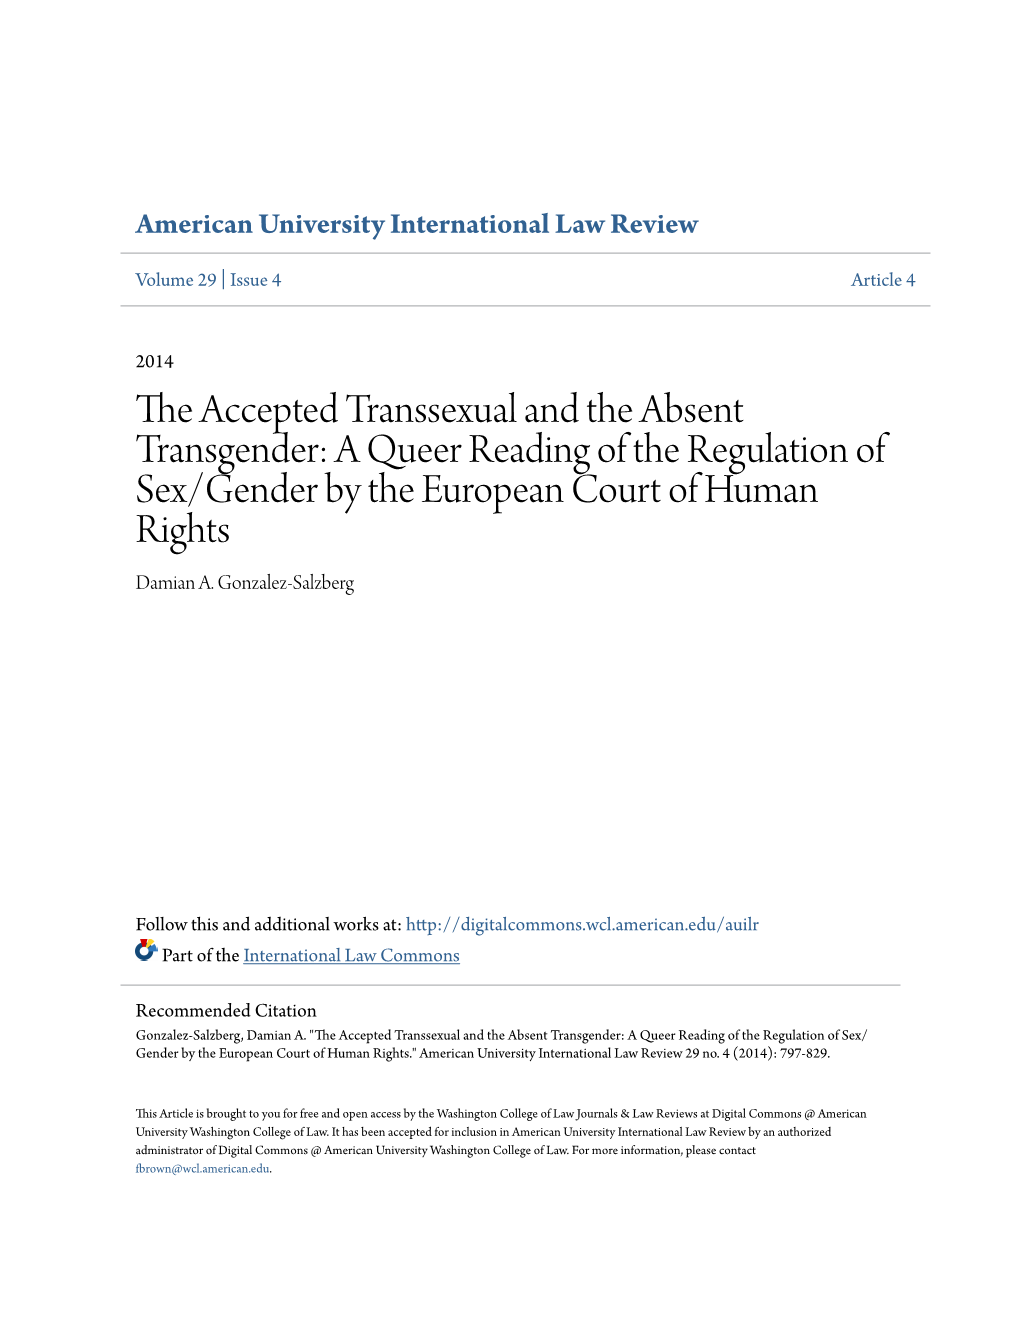 The Accepted Transsexual and the Absent Transgender: a Queer Reading of the Regulation of Sex/Gender by the European Court of Human Rights Damian A